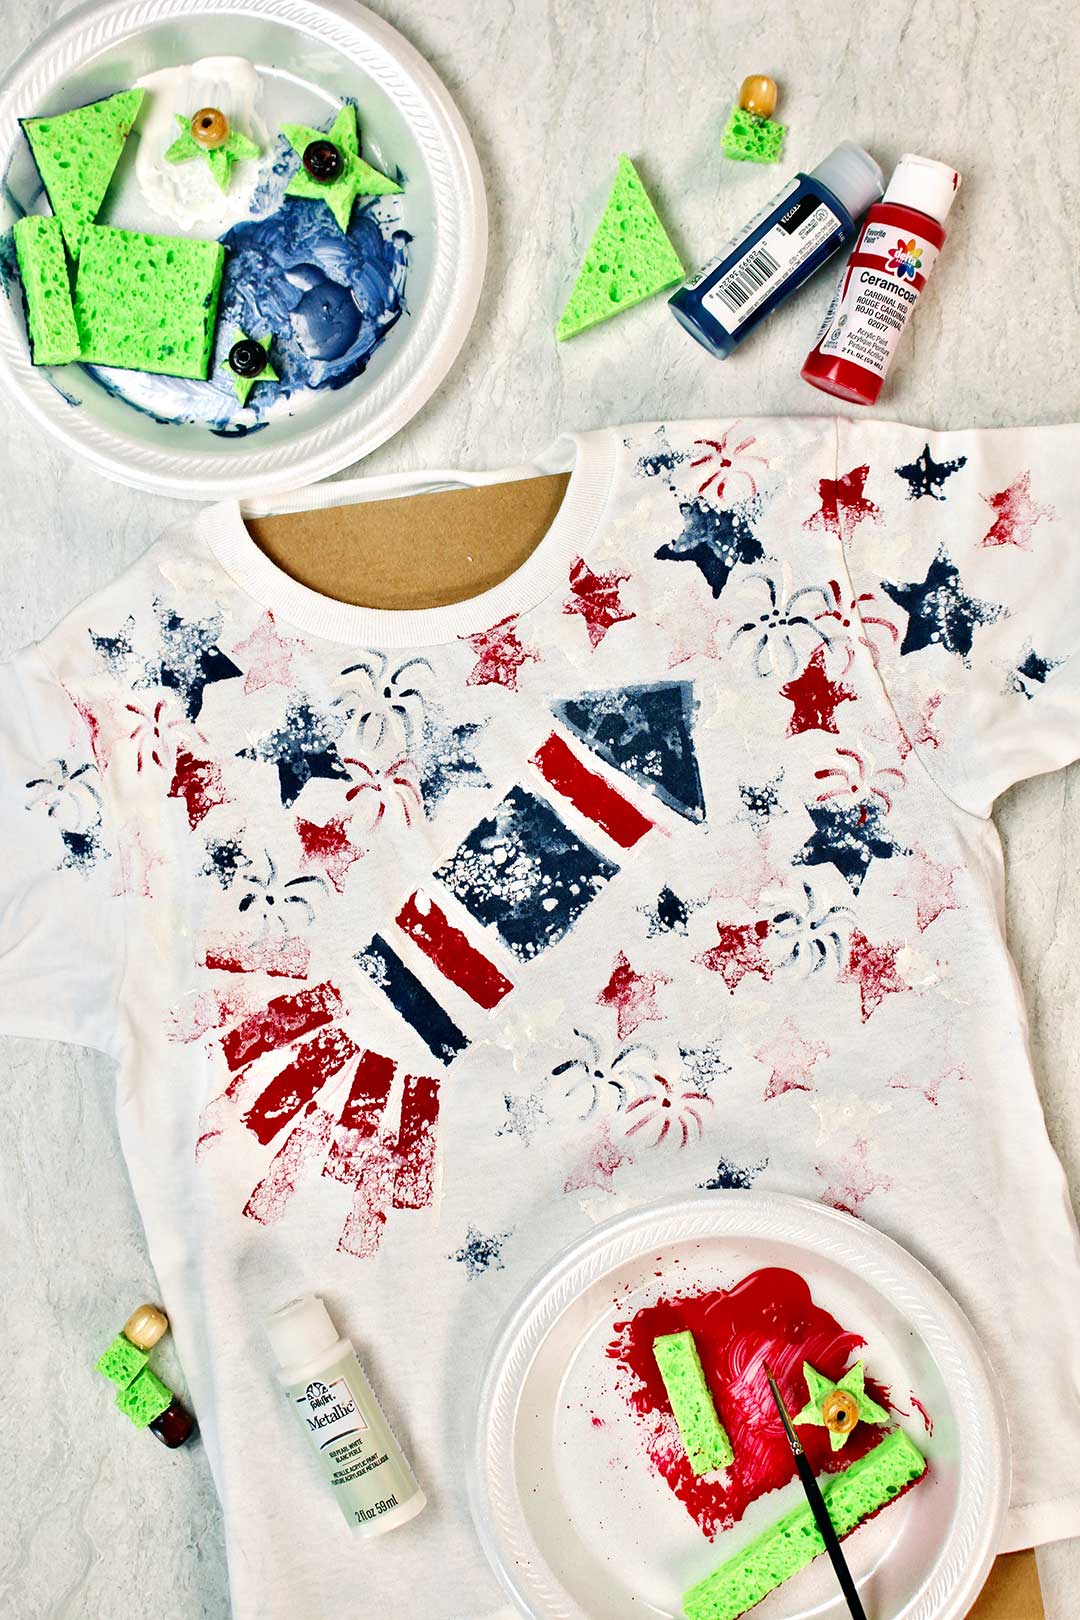 Finished sponge painted rocket 4th of July shirt lays near foam plates with red, white and blue paints and pieces of sponge.